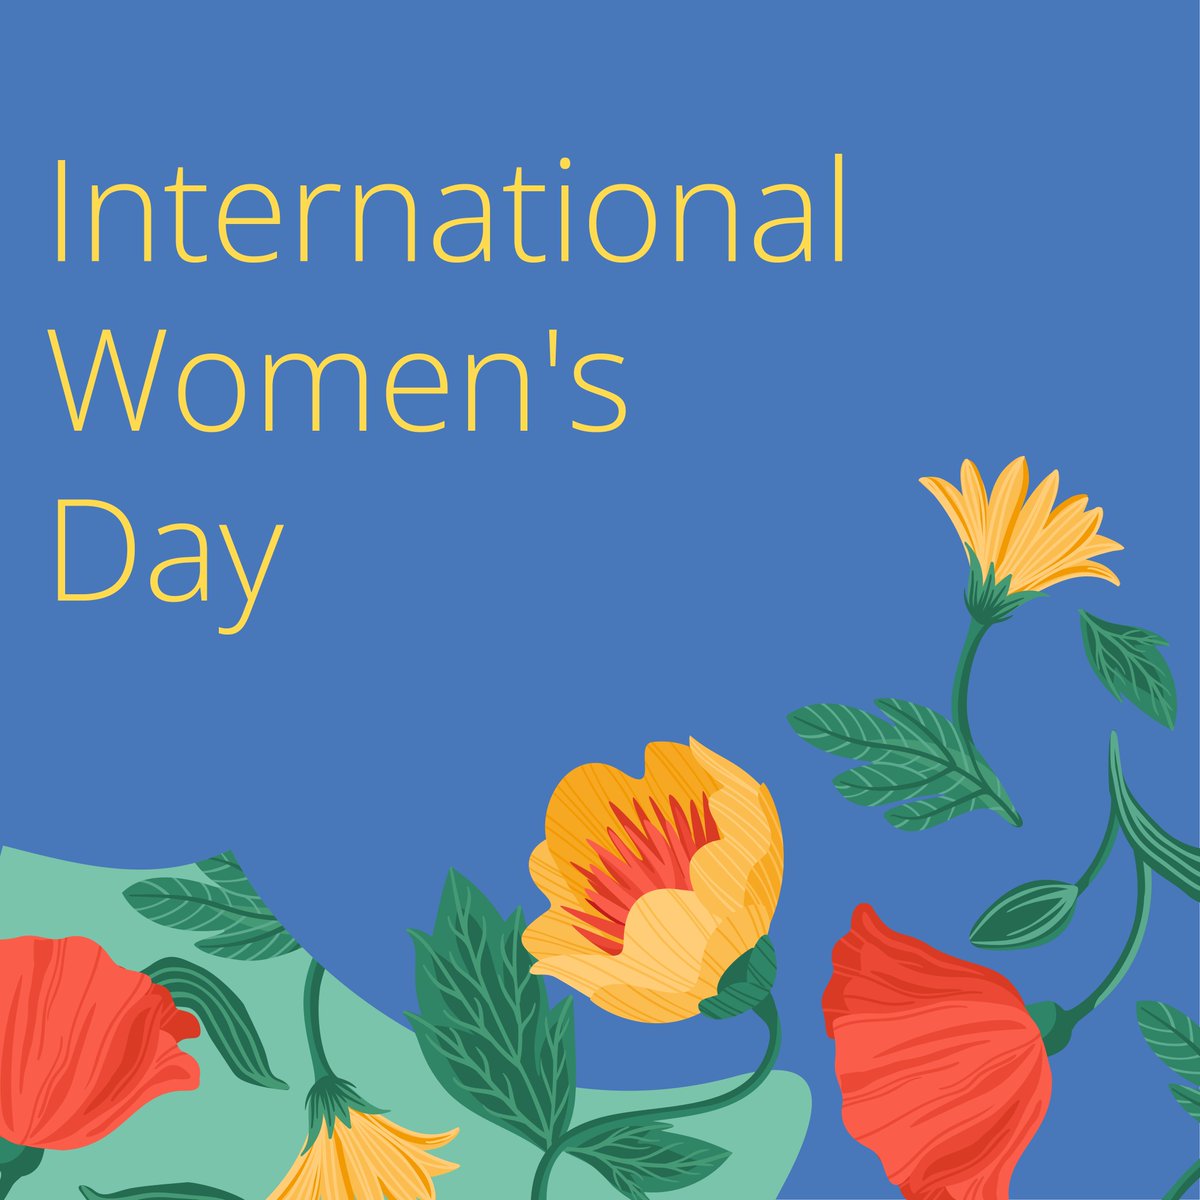 #InternationalWomensDay is an important opportunity to celebrate women’s achievements. The 2024 theme is #InspireInclusion, creating spaces for all women, celebrating their diversity and building a sense of belonging. For more info, visit internationalwomensday.com/Theme.